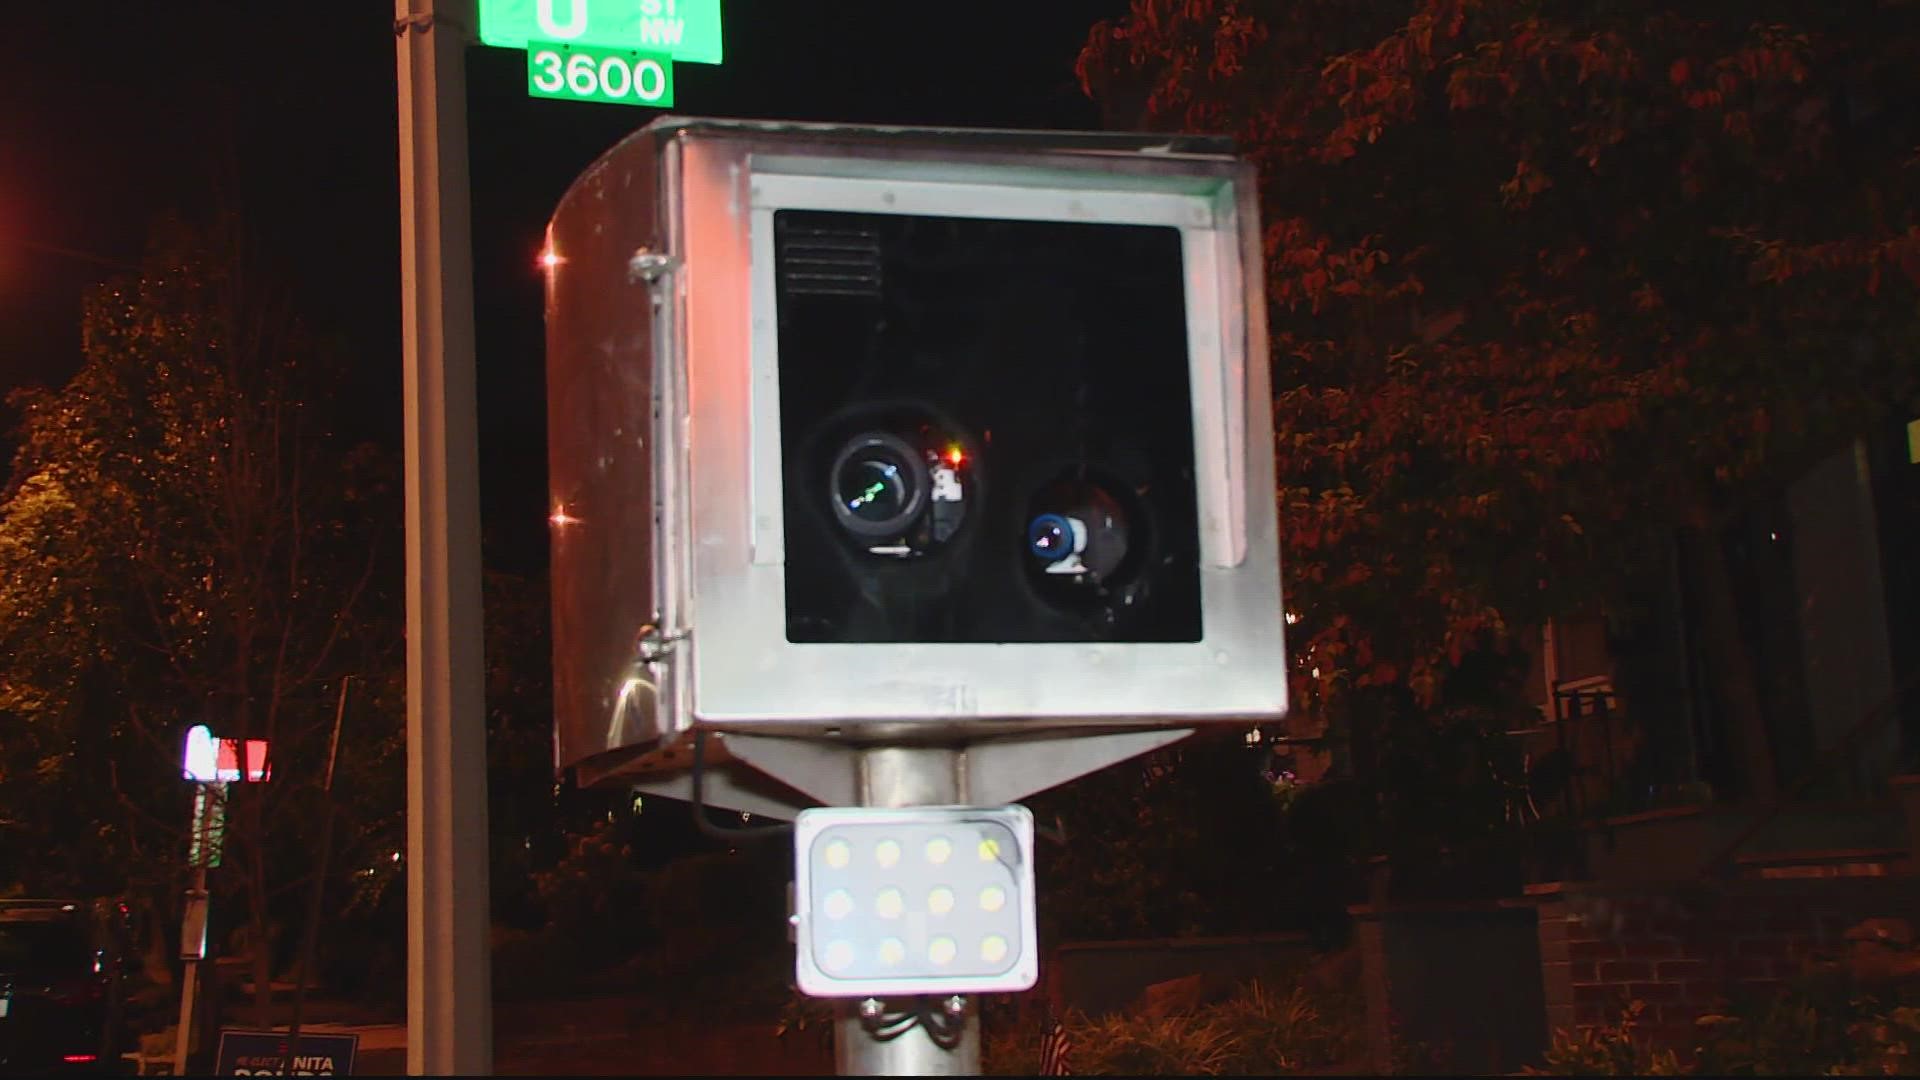 D.C. loves to ticket speeders. And now we know where most drivers are getting caught.